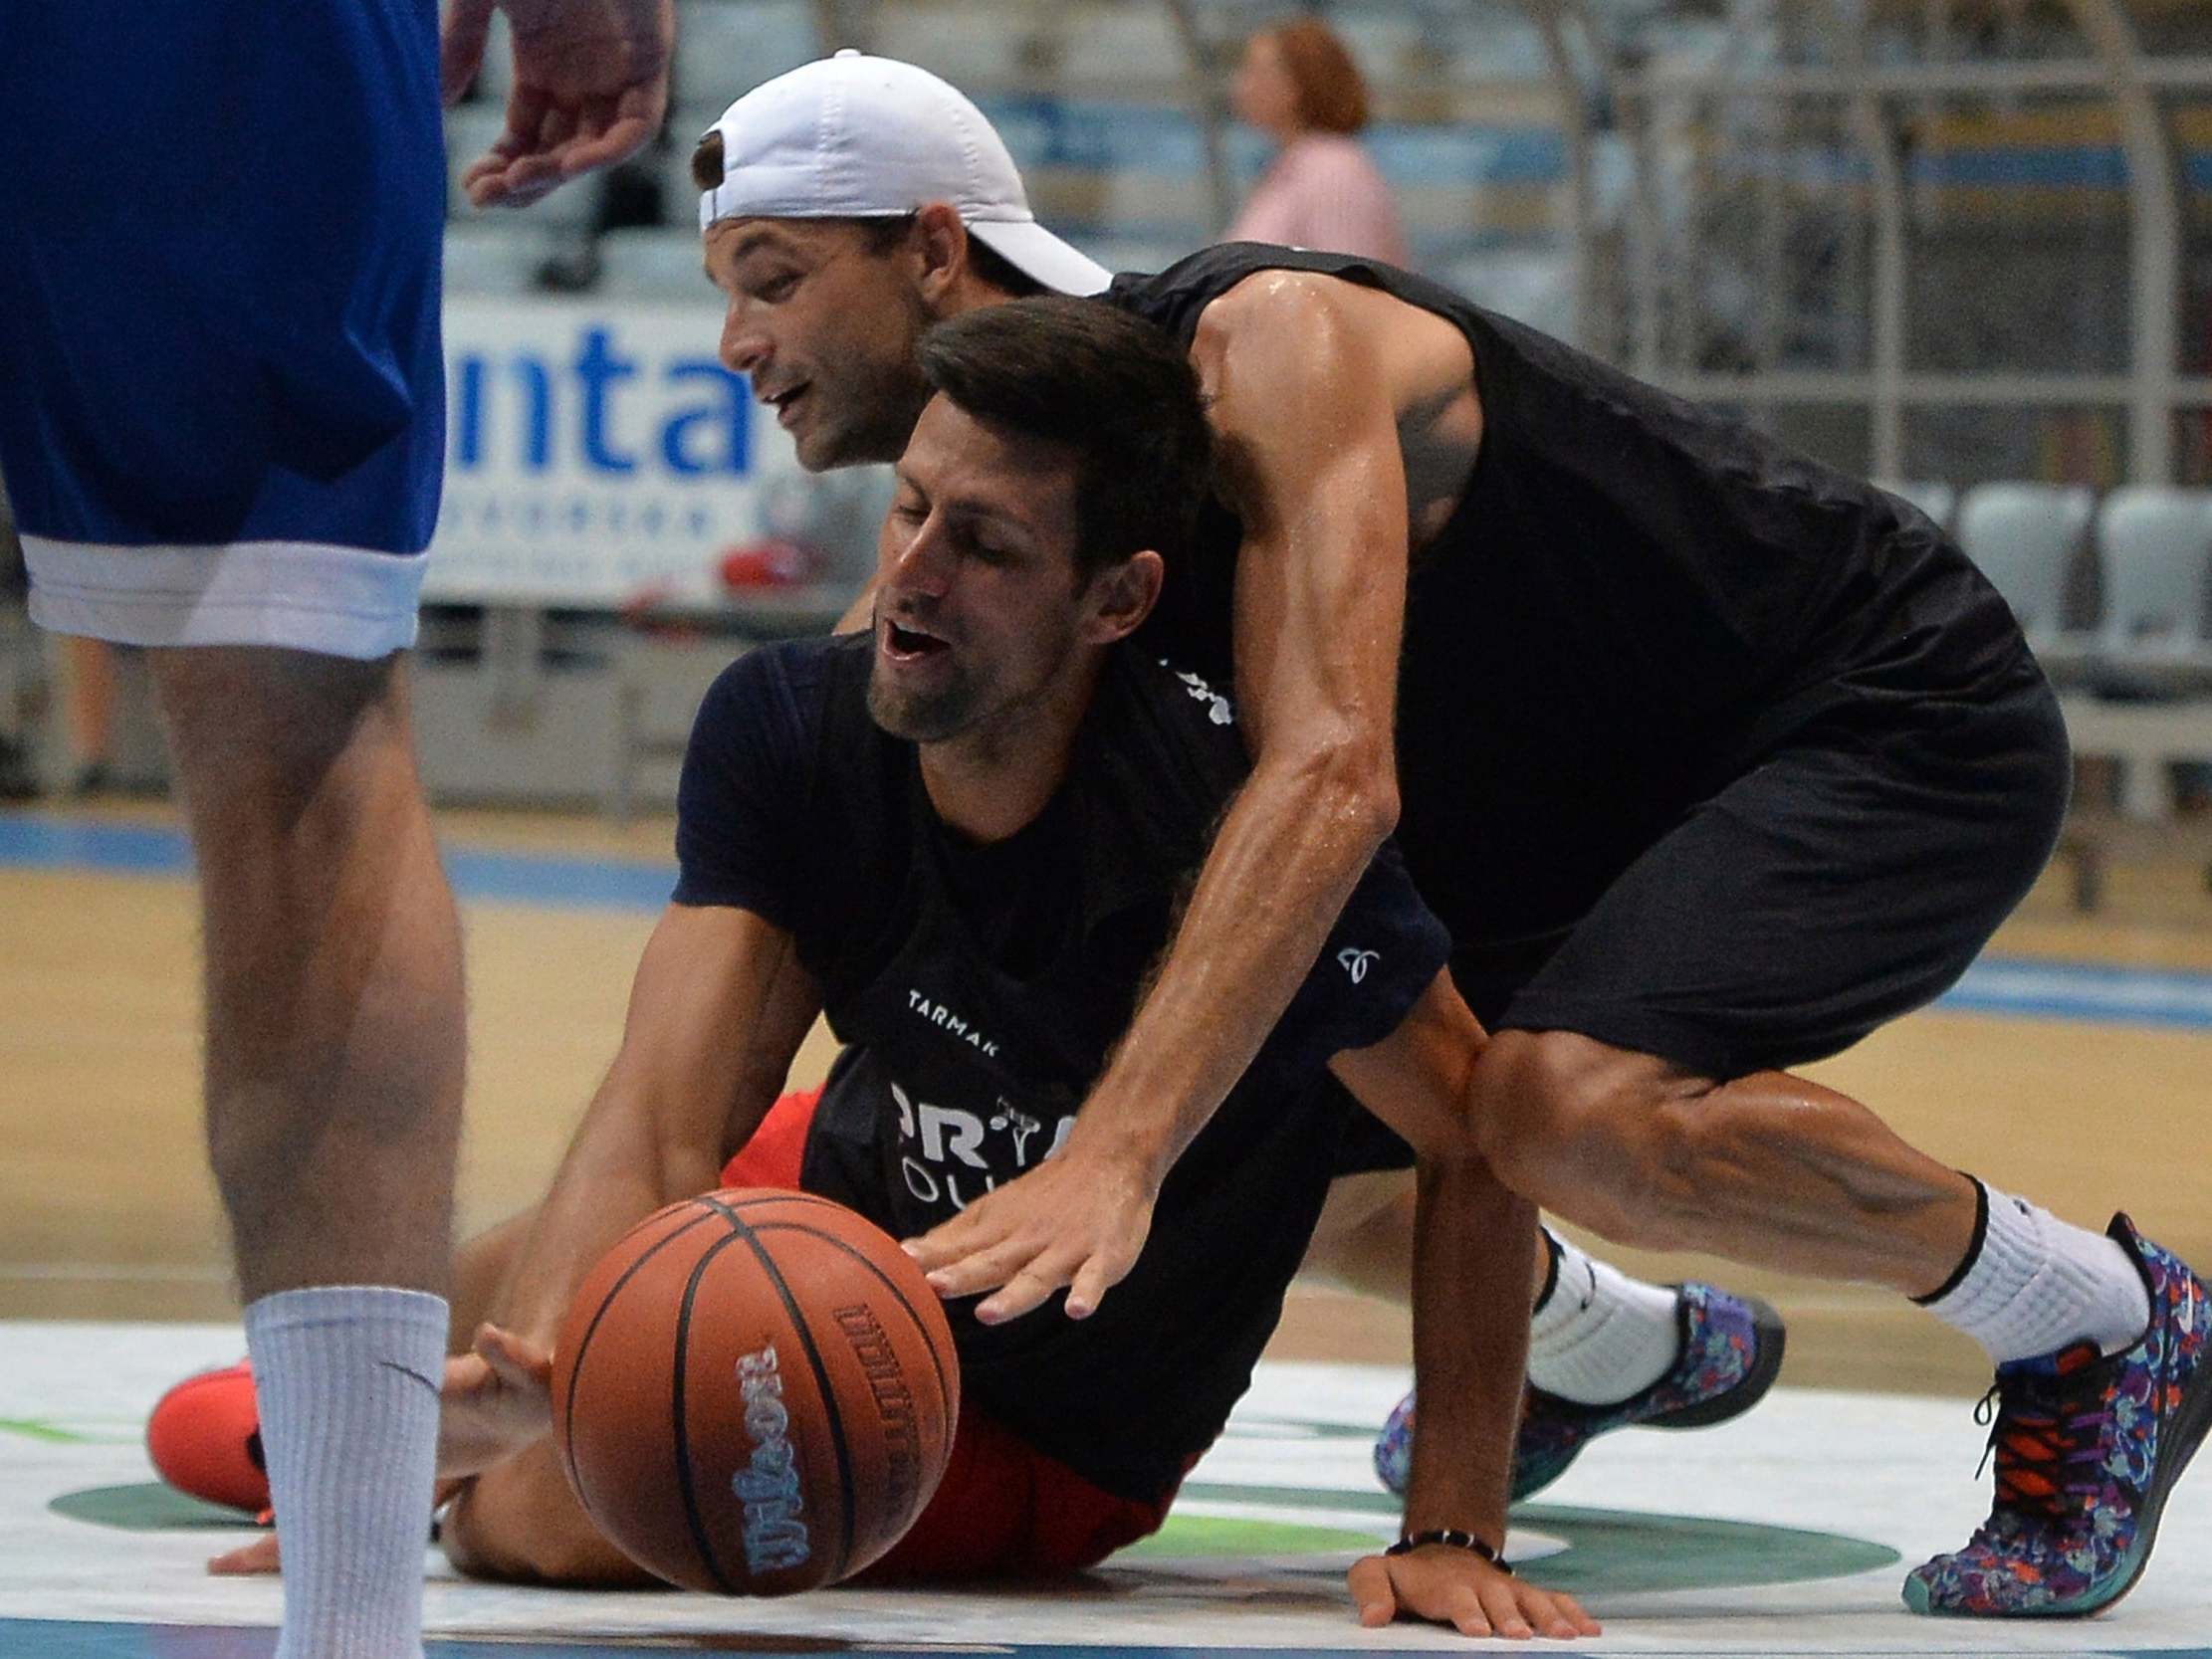 Djokovic and Dimitrov played basketball together with other players on Thursday